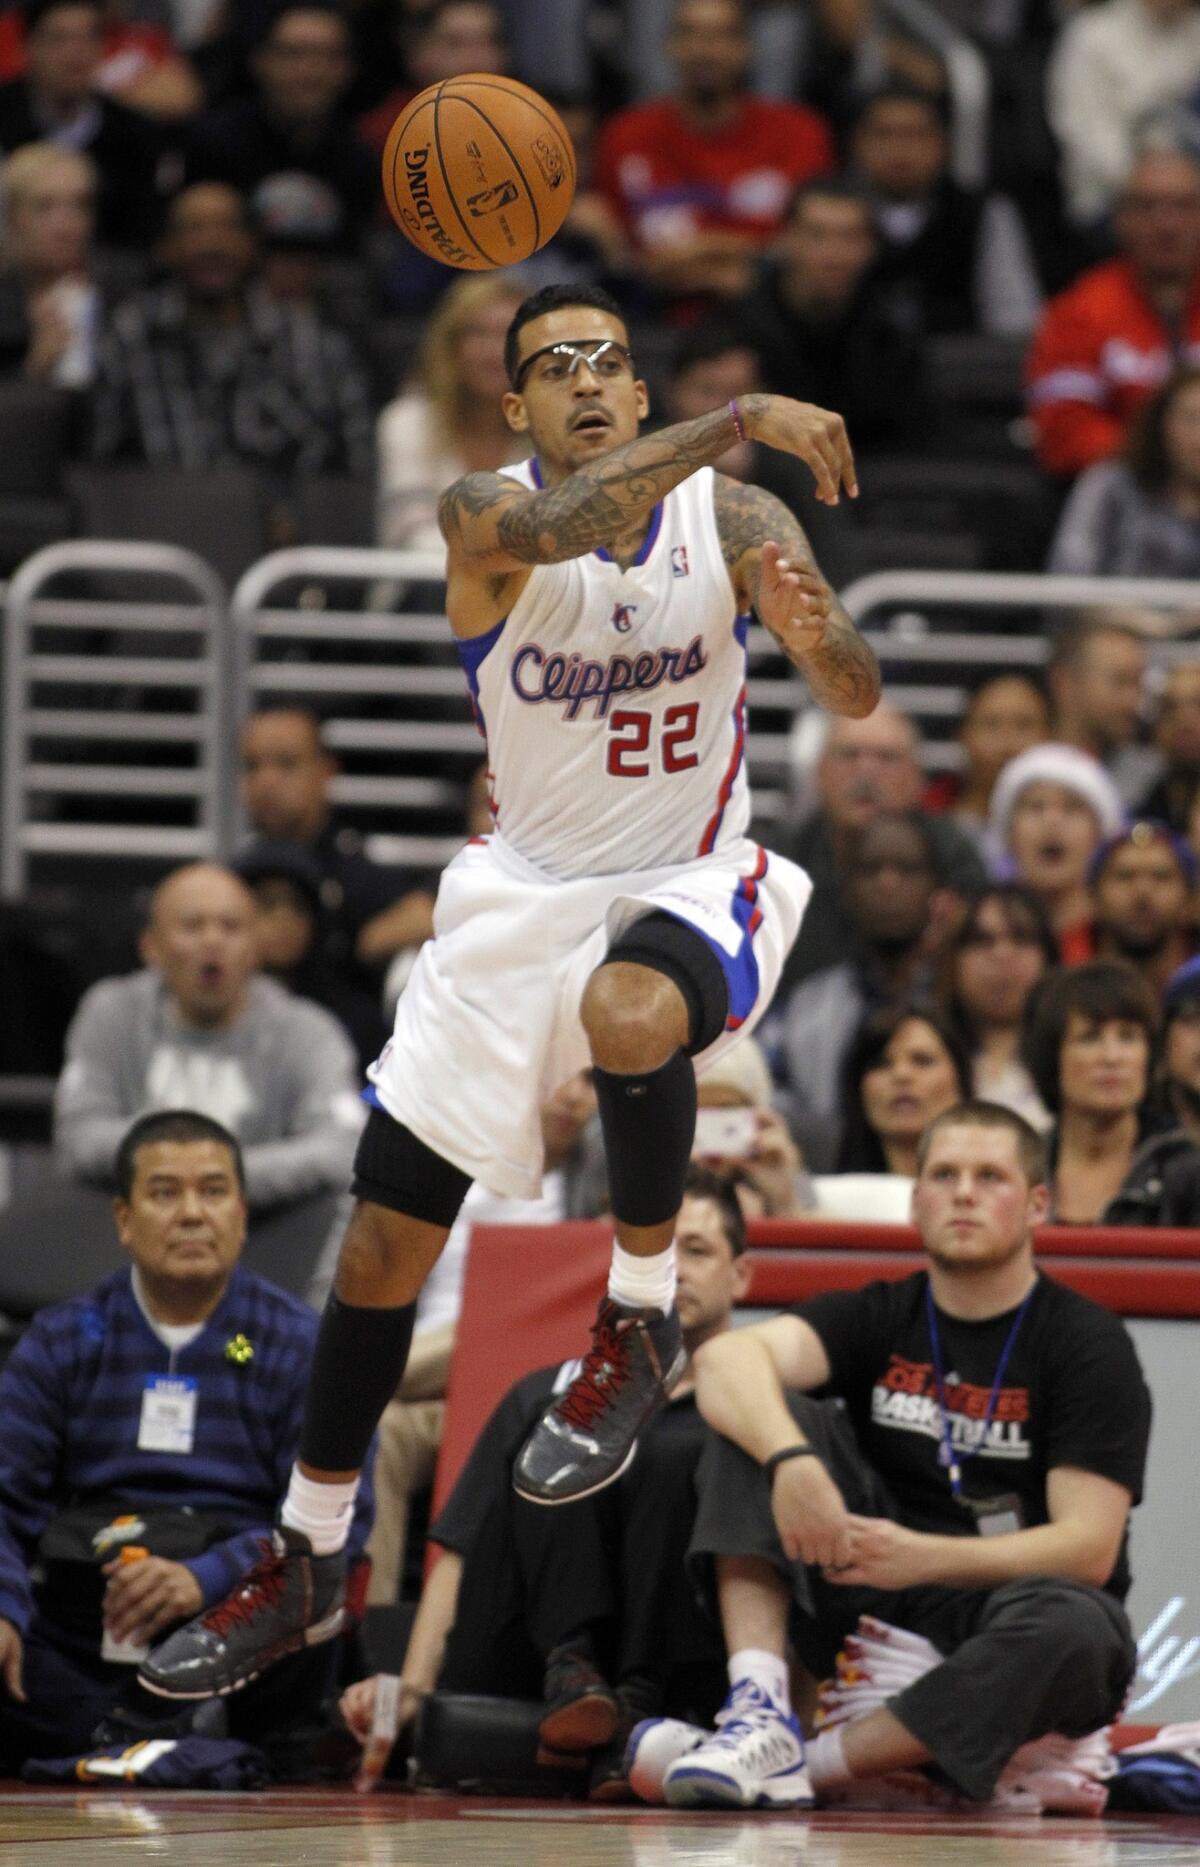 Clippers forward Matt Barnes passes during the team's 112-91 win Saturday over the Denver Nuggets. Barnes' season has been interrupted by injuries.